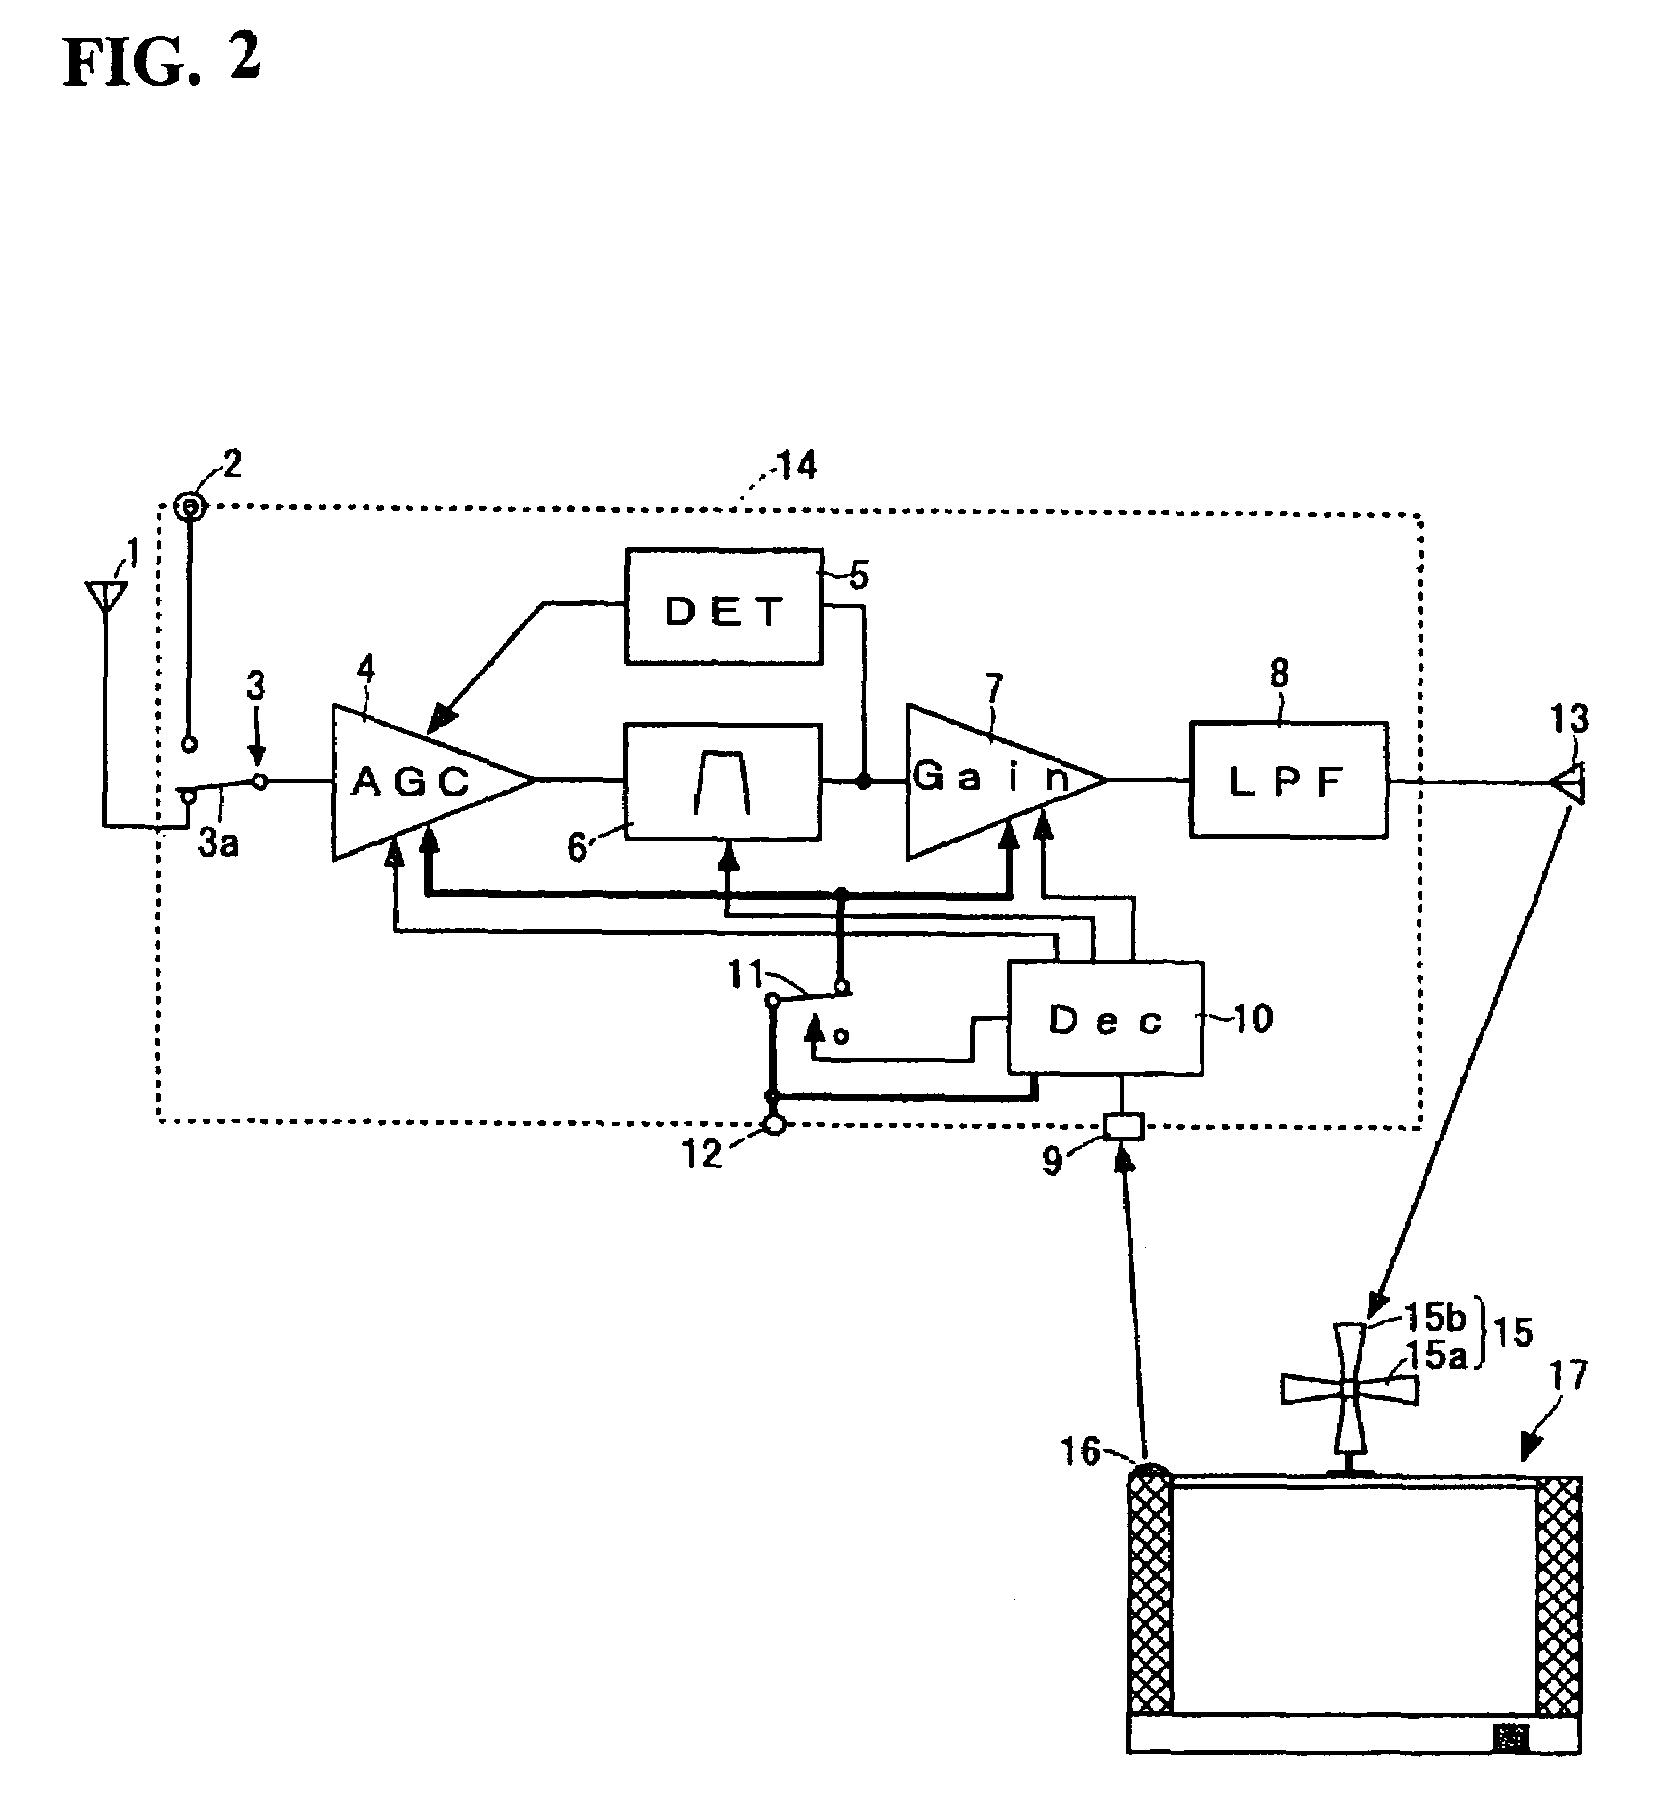 Re-transmitter and digital broadcast receiving system